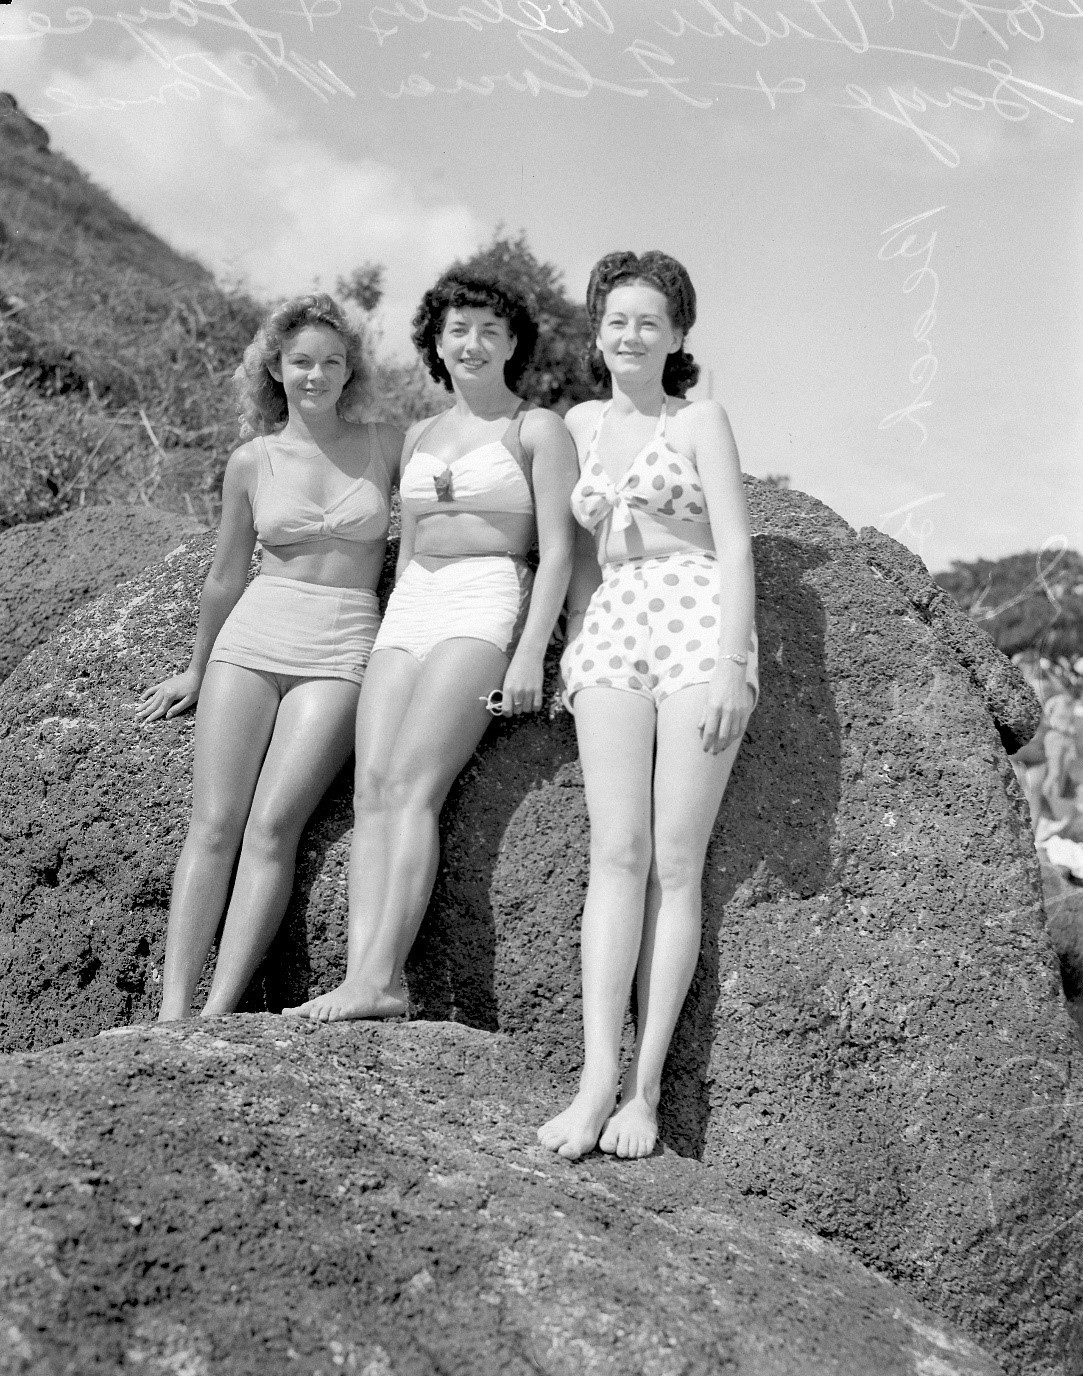 Photo of three women posing in bathing suits on rocks at Greenmount Beach in 1947